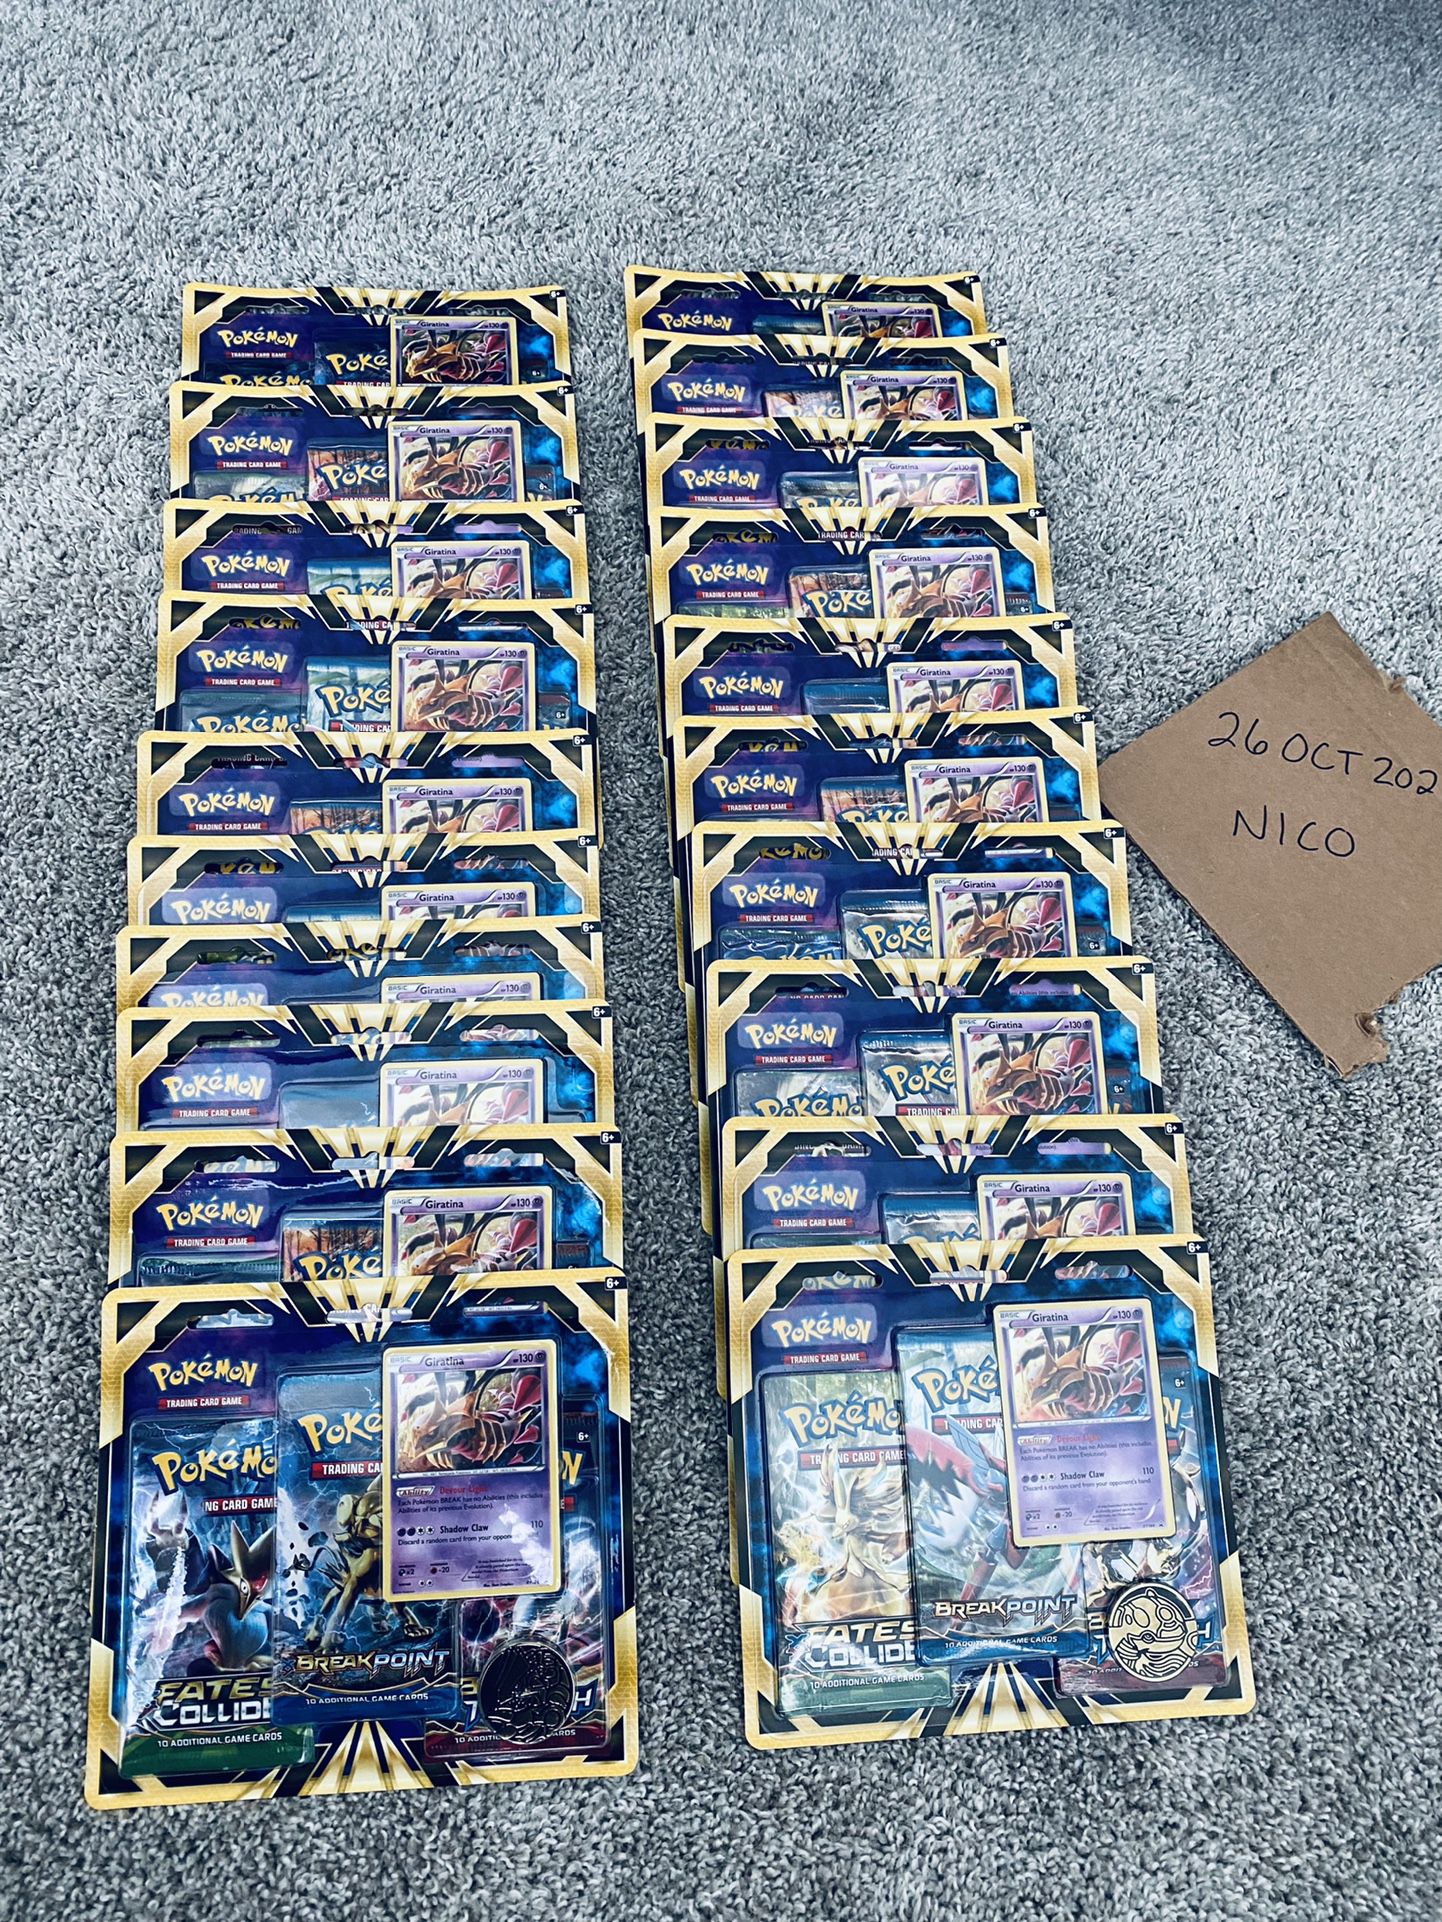 (20) 3 pack Giratina blisters XY Fates Collide, BreakPoint, Breakthrough $500 OBO